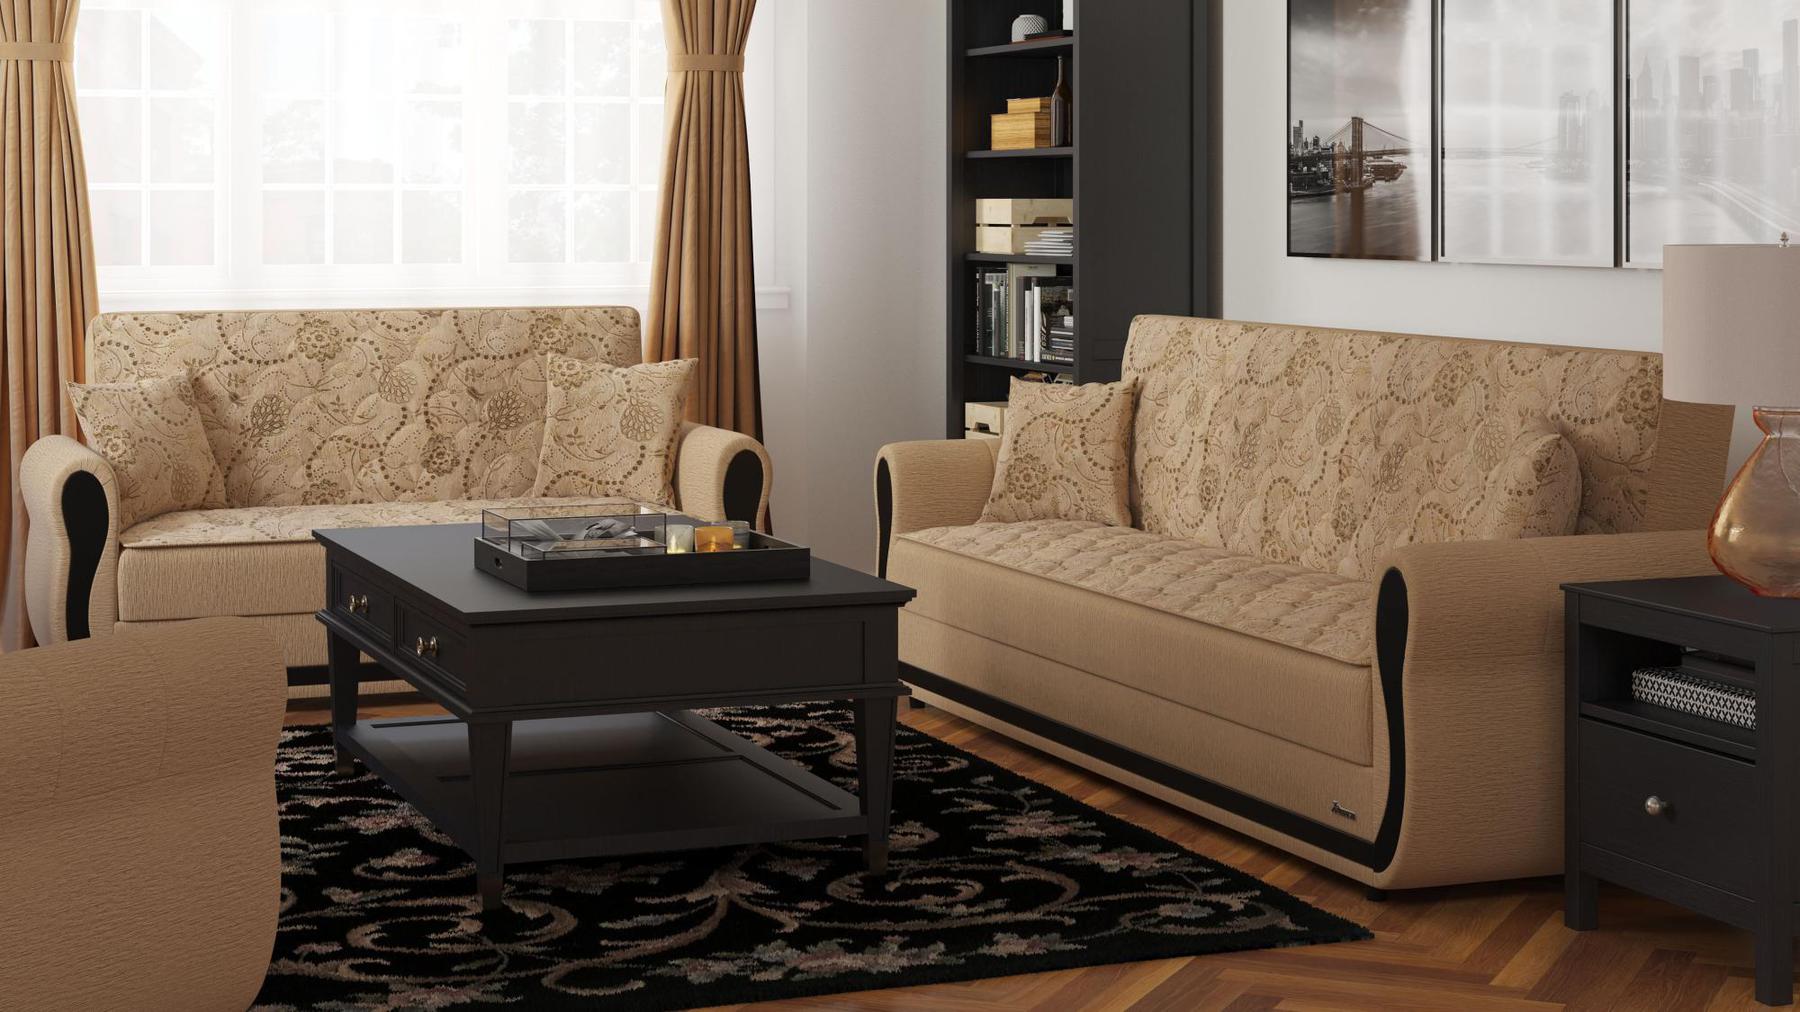 Modern design, Linen Color , Chenille upholstered convertible sleeper Loveseat with underseat storage from Victoria Urban by Ottomanson in living room lifestyle setting with another piece of furniture. This Loveseat measures 70 inches width by 28 inches depth by 38 inches height.